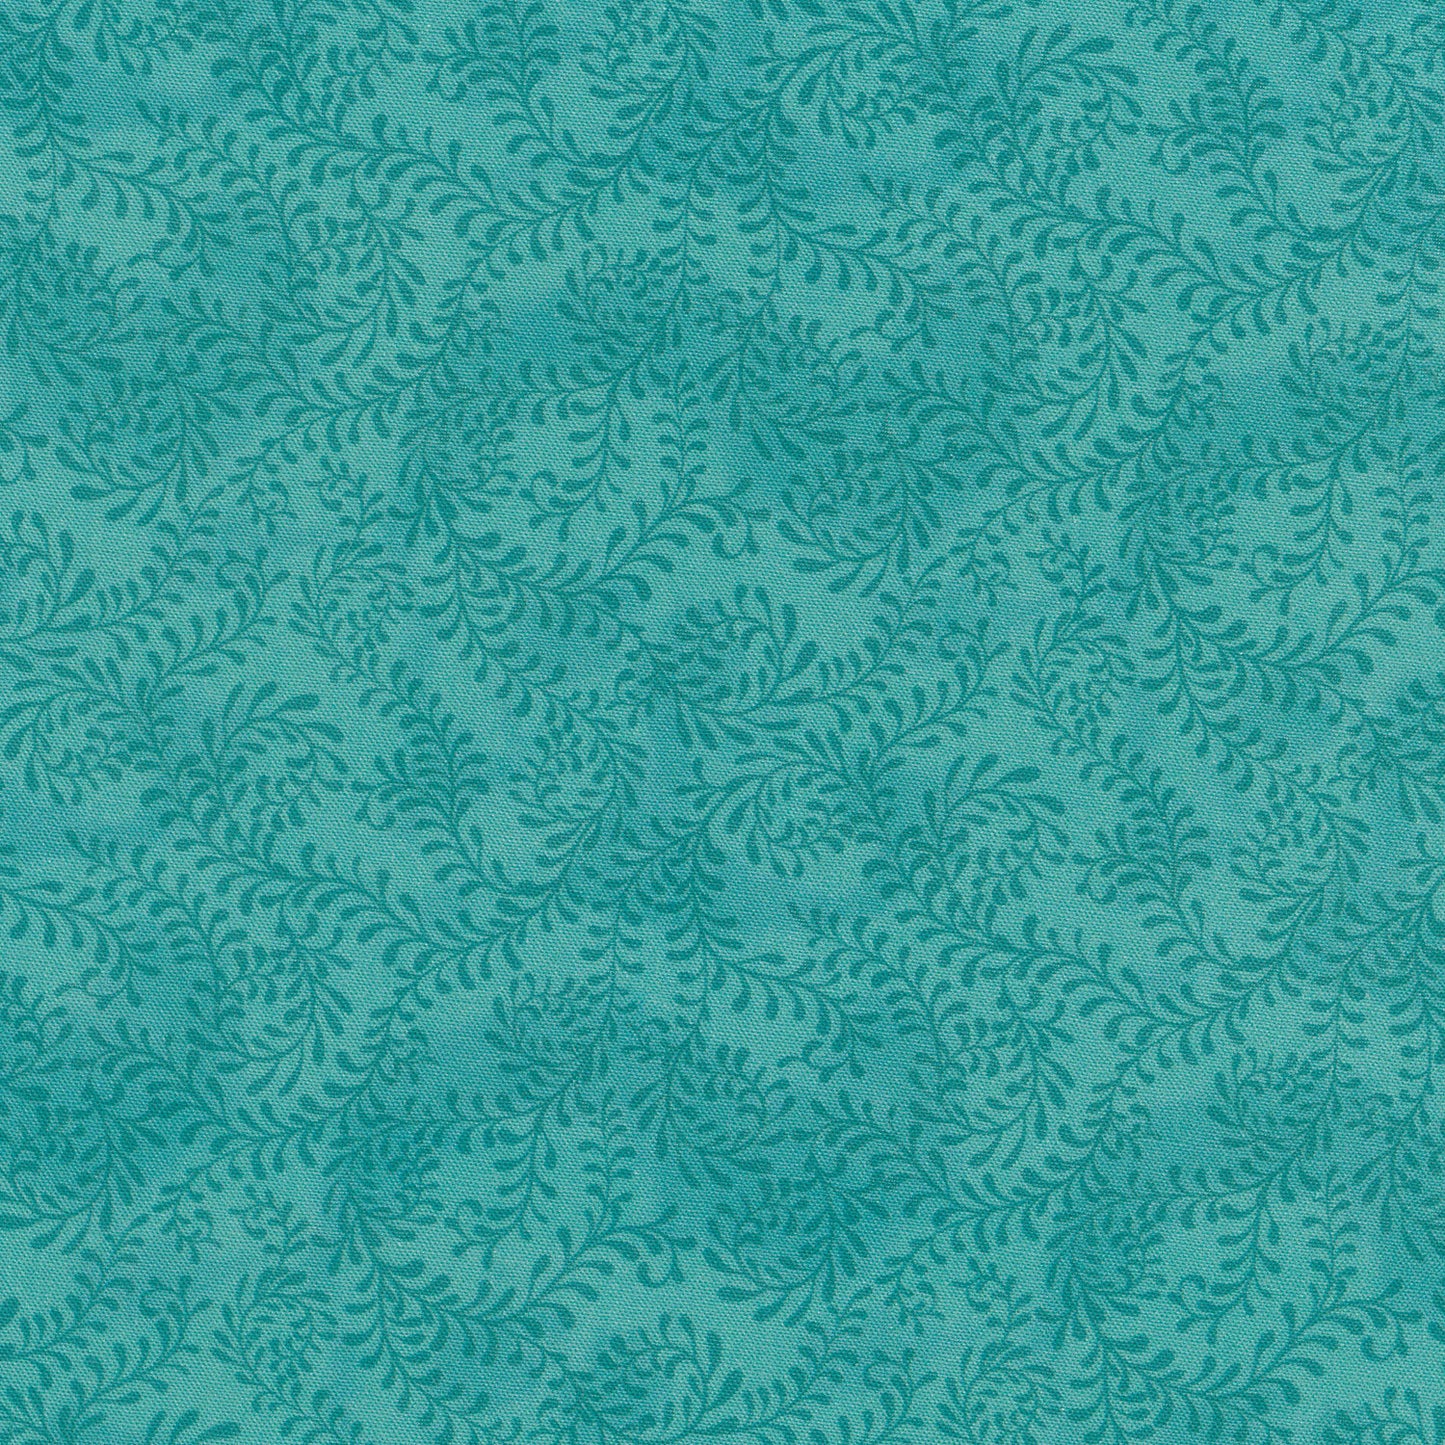 Wilmington Essentials - Swirling Leaves Teal 108" Wide Backing Yardage Primary Image